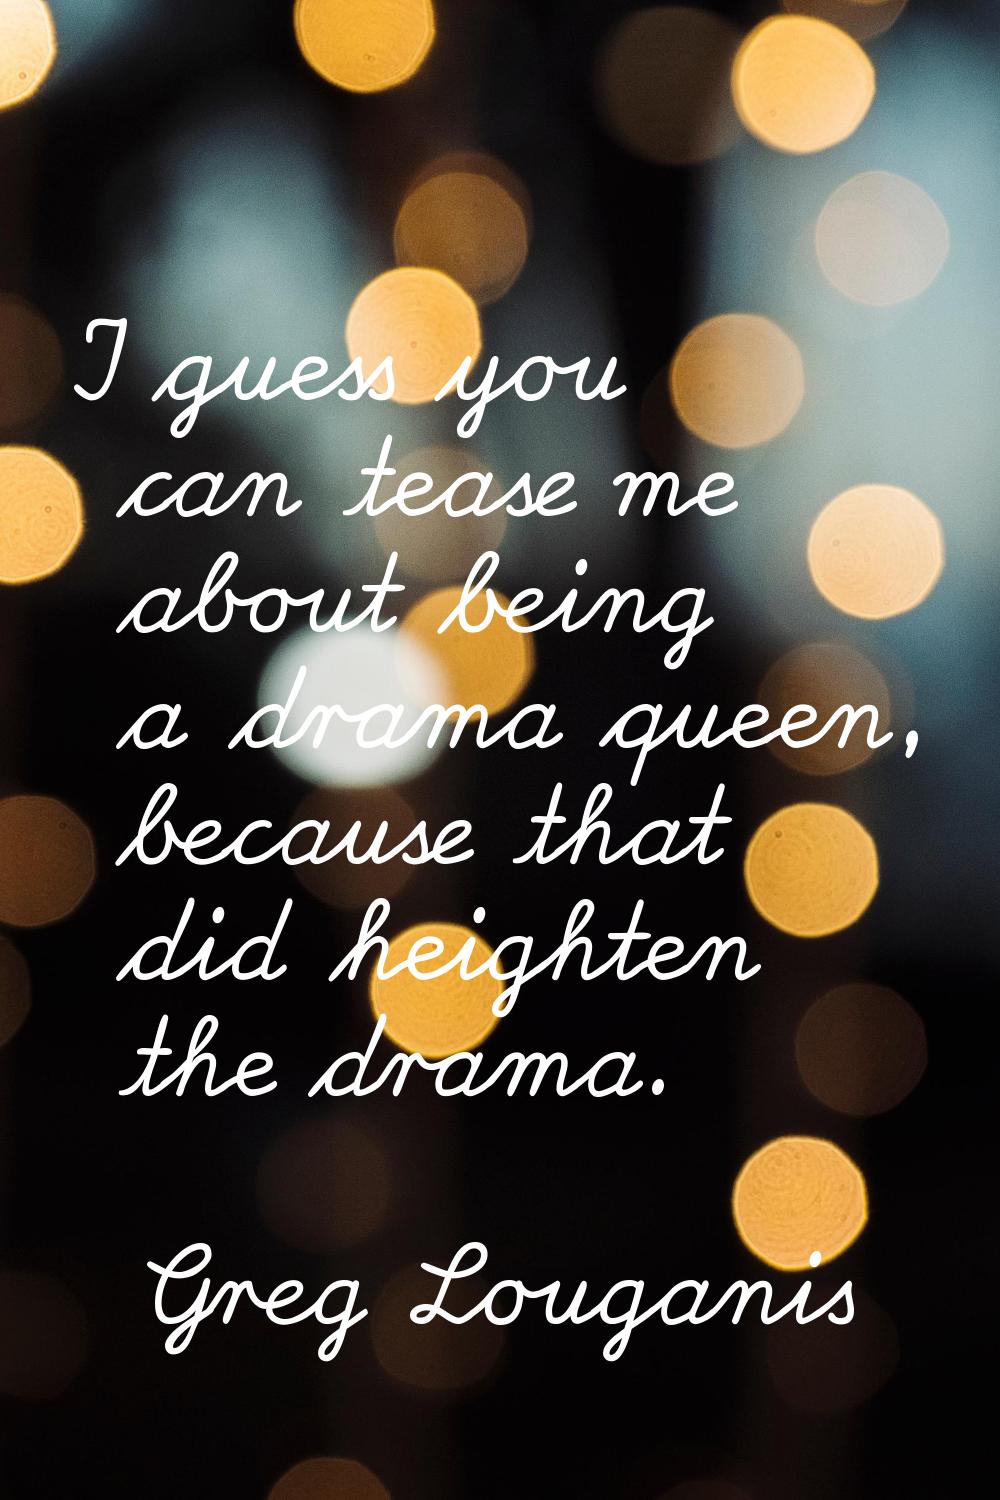 I guess you can tease me about being a drama queen, because that did heighten the drama.